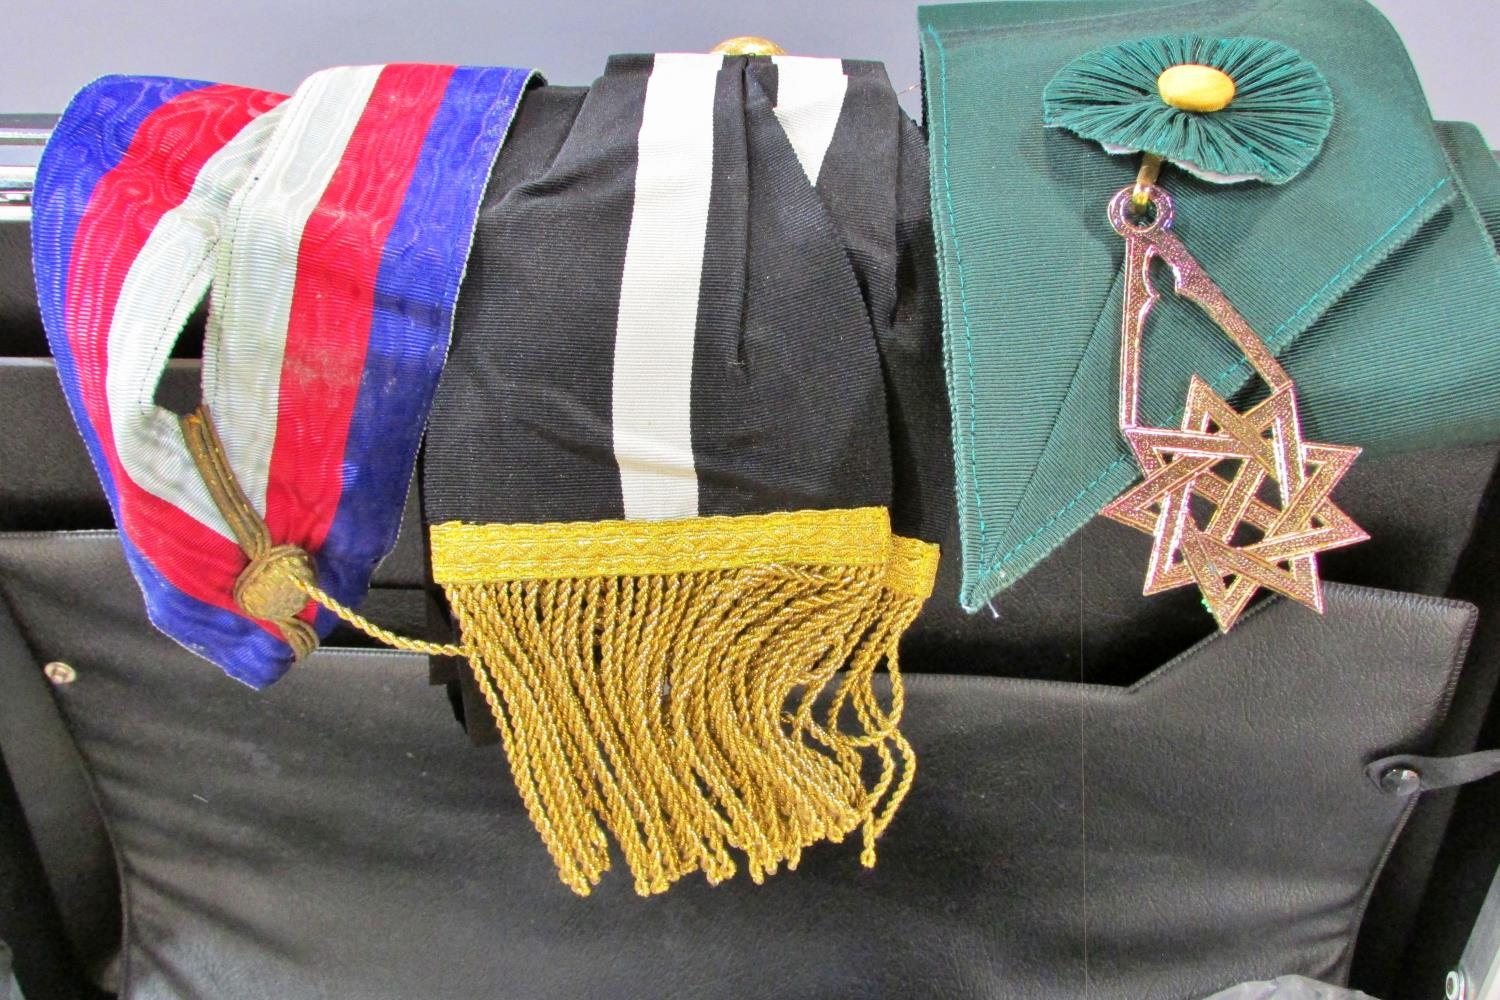 Masonic Regalia of several sashes or varying patterns, some decorated with medallions and gold braid - Image 3 of 4